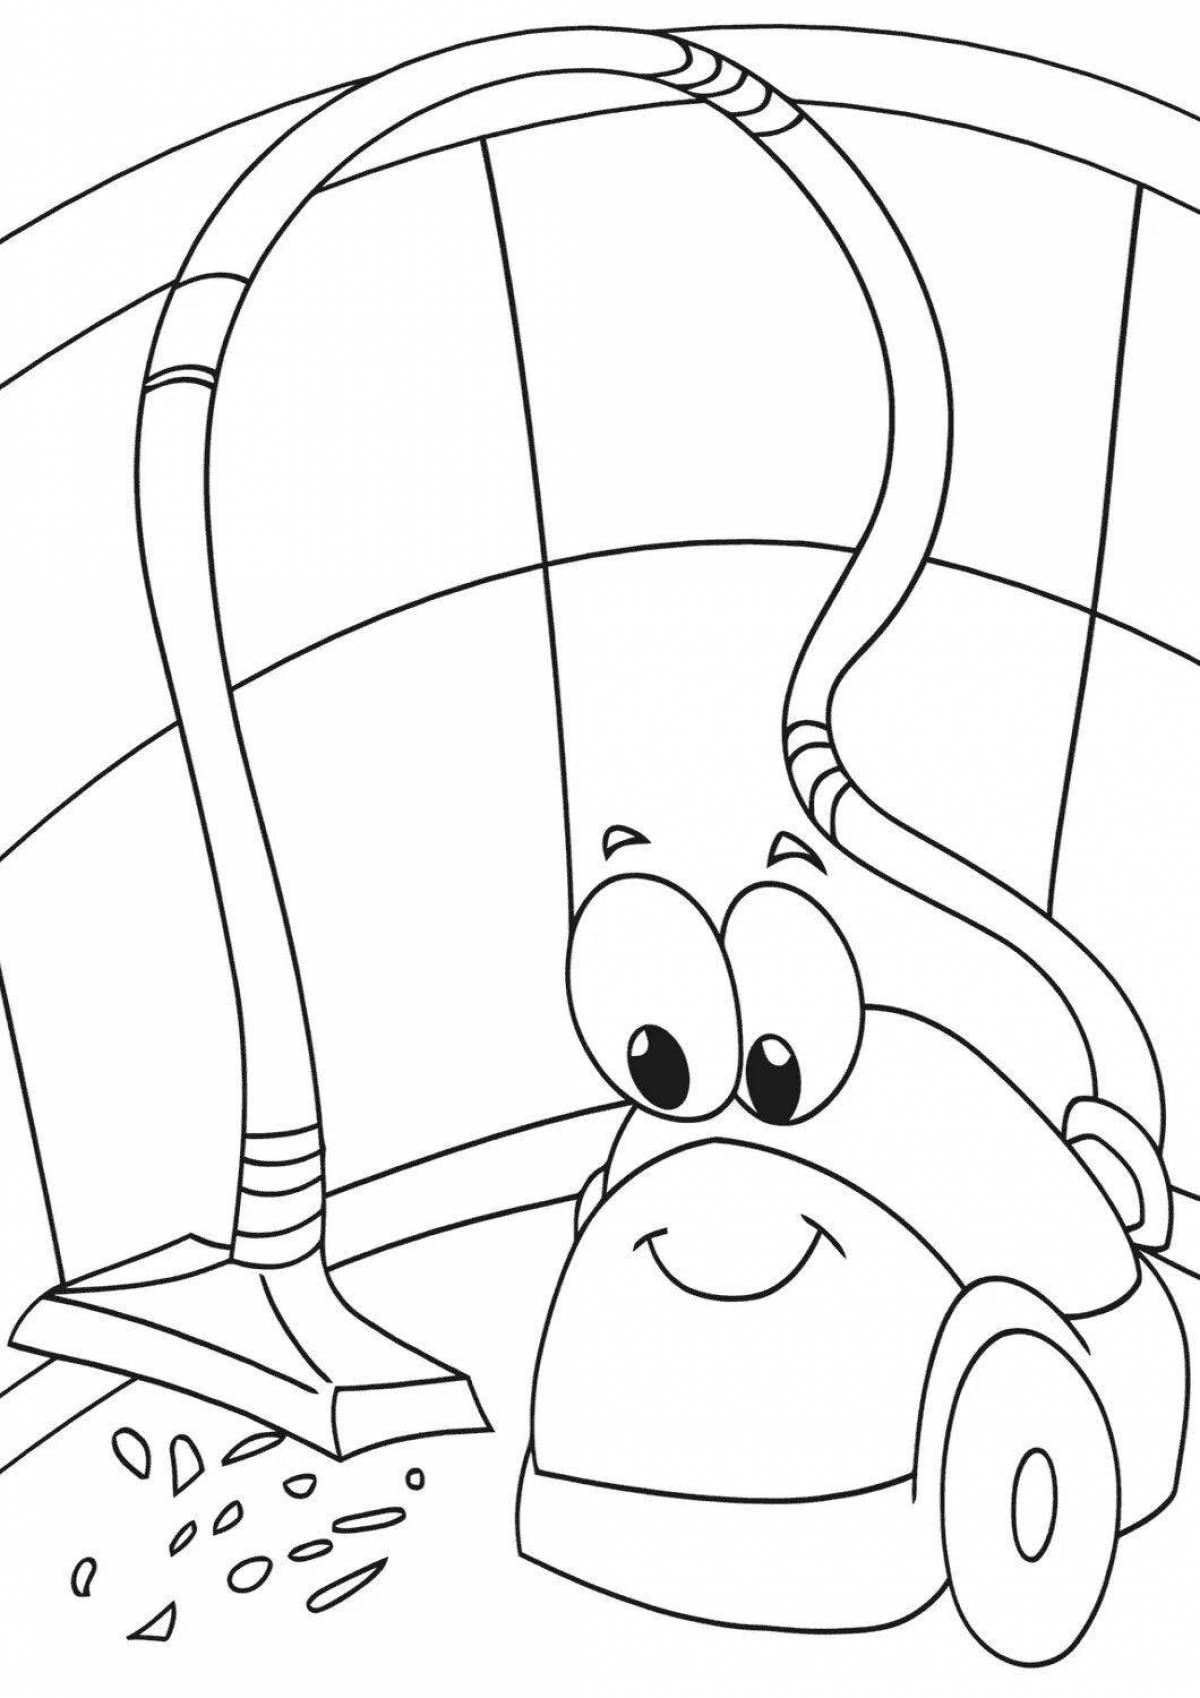 Amazing robot vacuum cleaner coloring book for boys